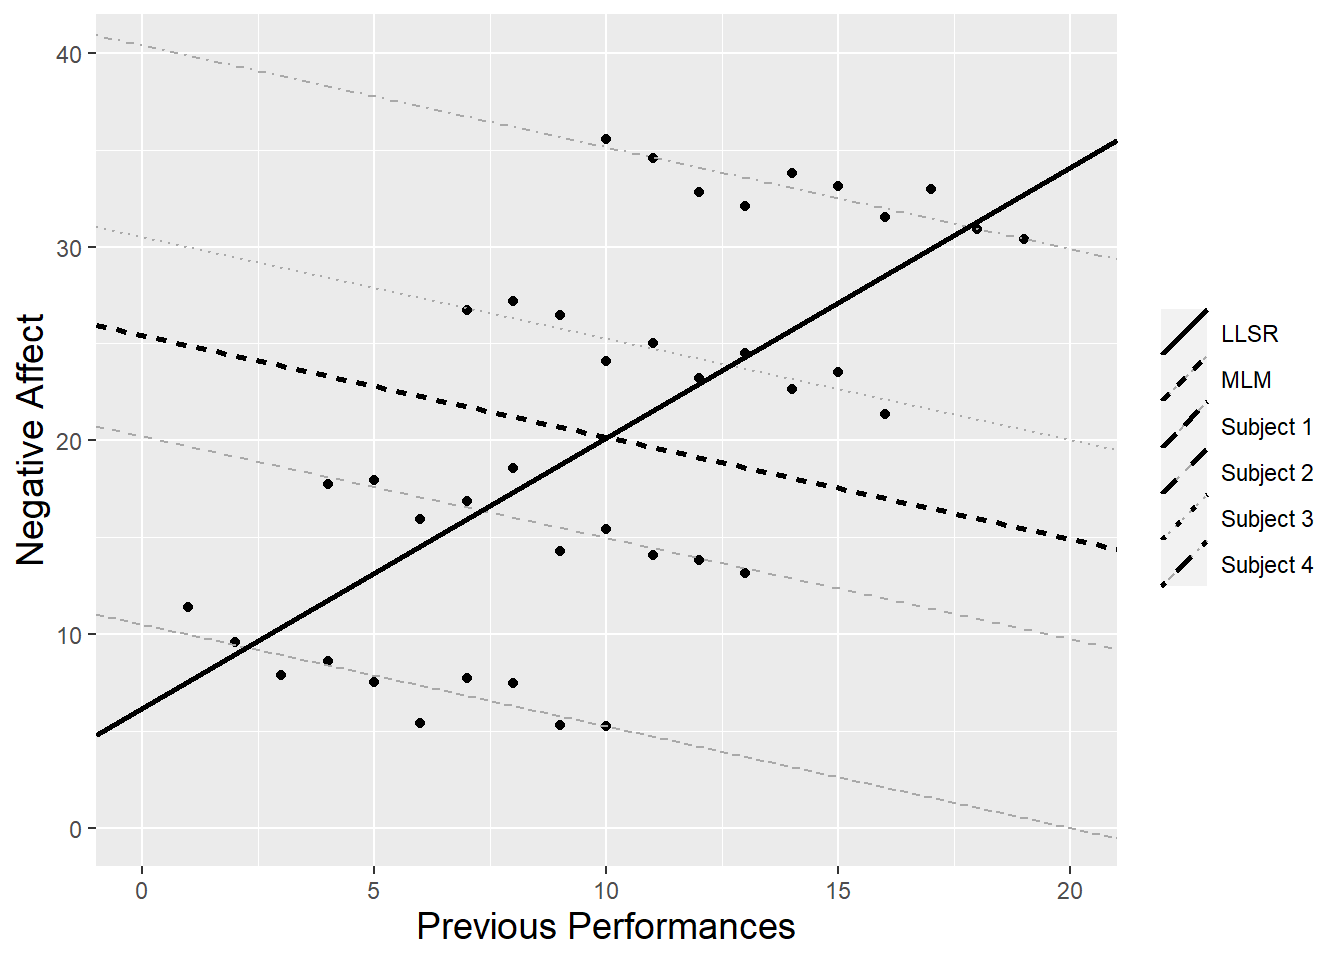 Hypothetical data from 4 subjects relating number of previous performances to negative affect.  The dashed black line depicts the overall relationship between previous performances and negative affect as determined by a multilevel model, while the solid black line depicts the overall relationship as determined by an LLSR regression model.